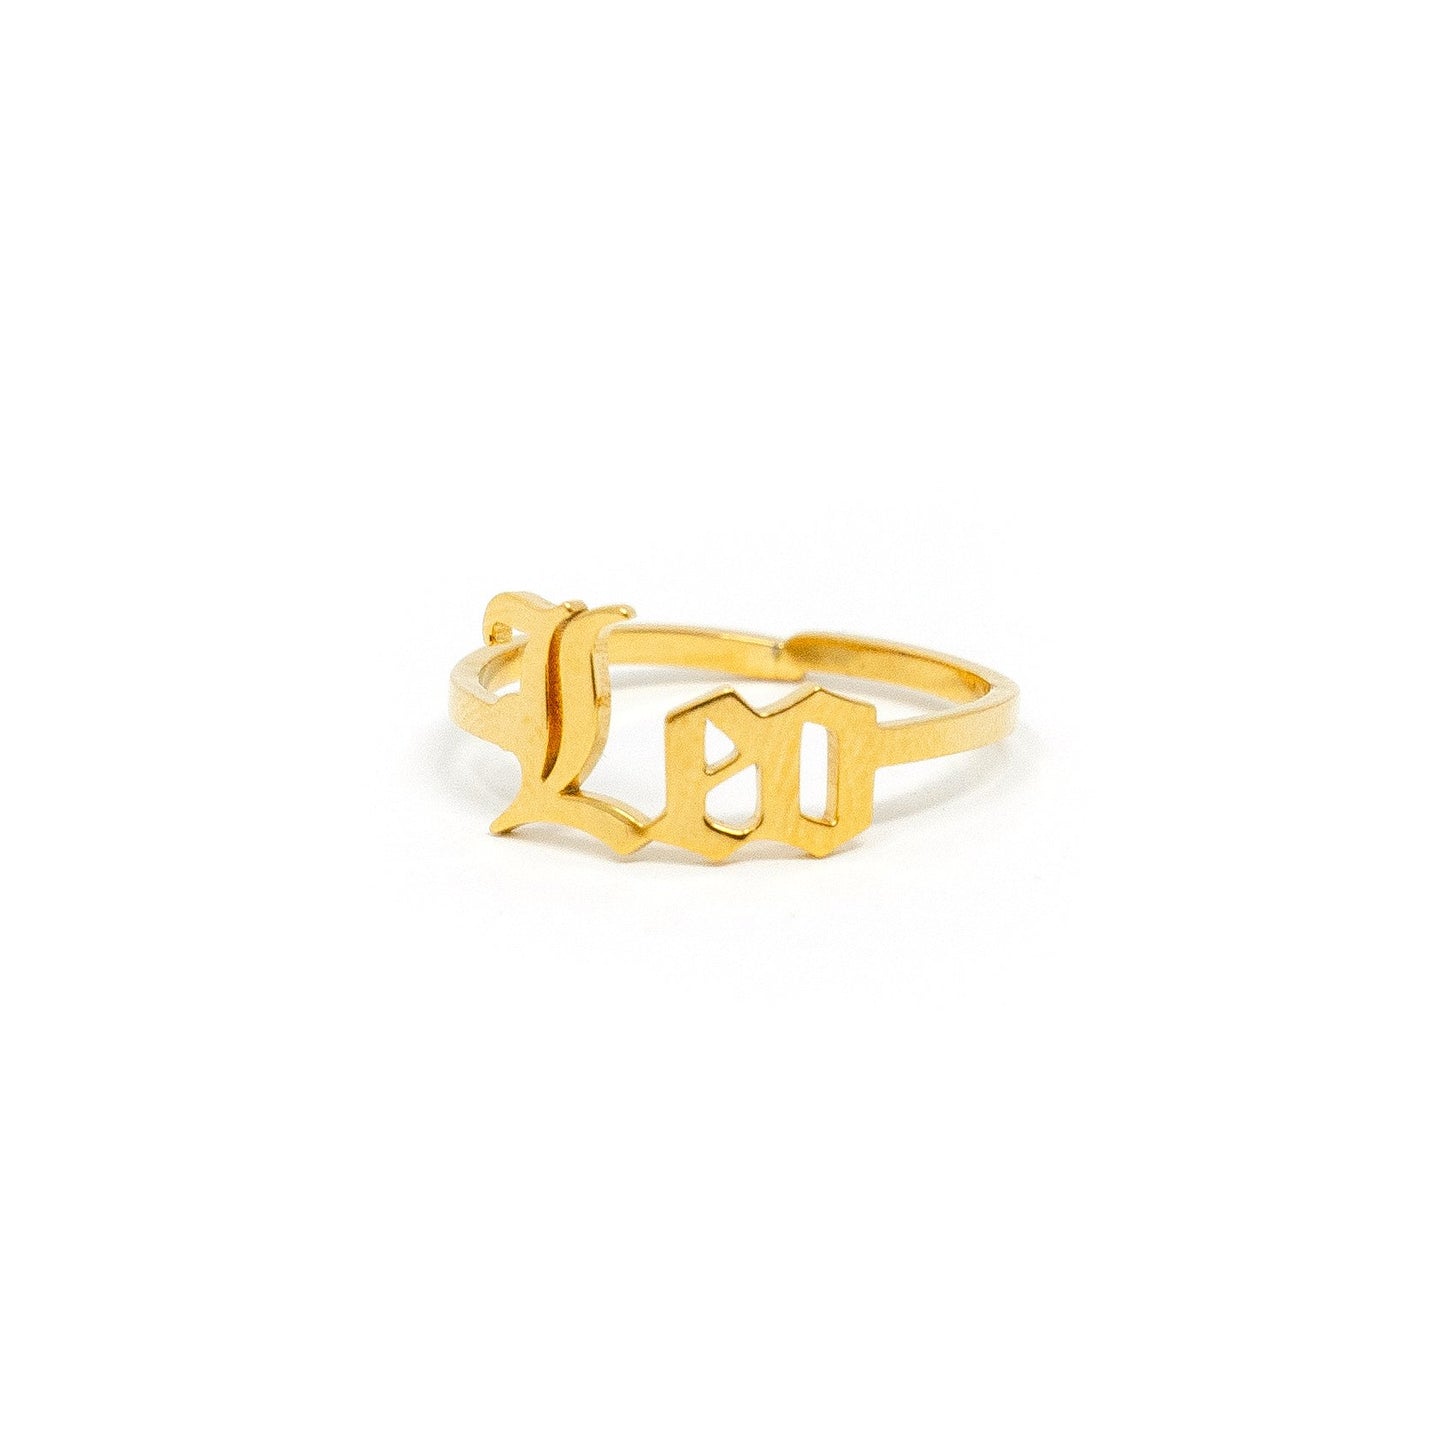 Zodiac Olde English Adjustable Rings JEWELRY The Sis Kiss